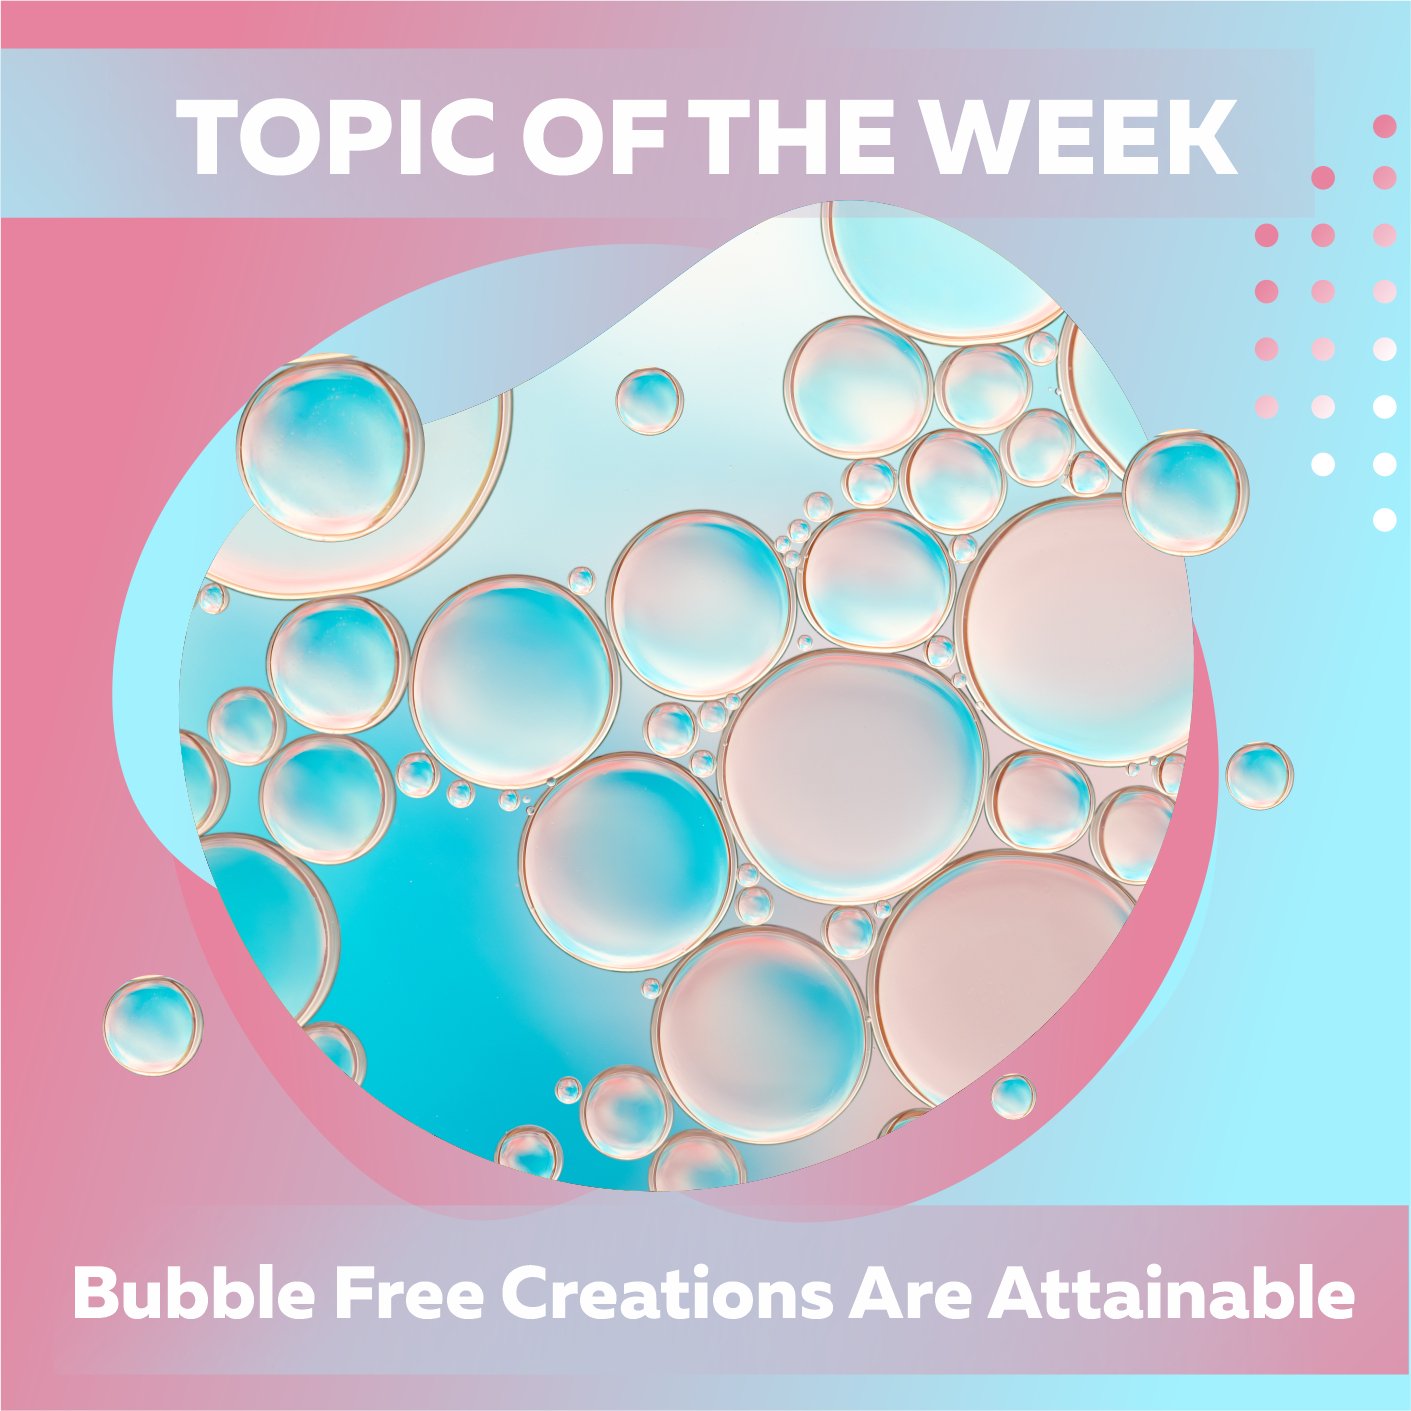 Bubble Free Creations Are Attainable - Read On To Learn How To Create Crystal Clear Epoxy Resin Projects: - Craft Resin